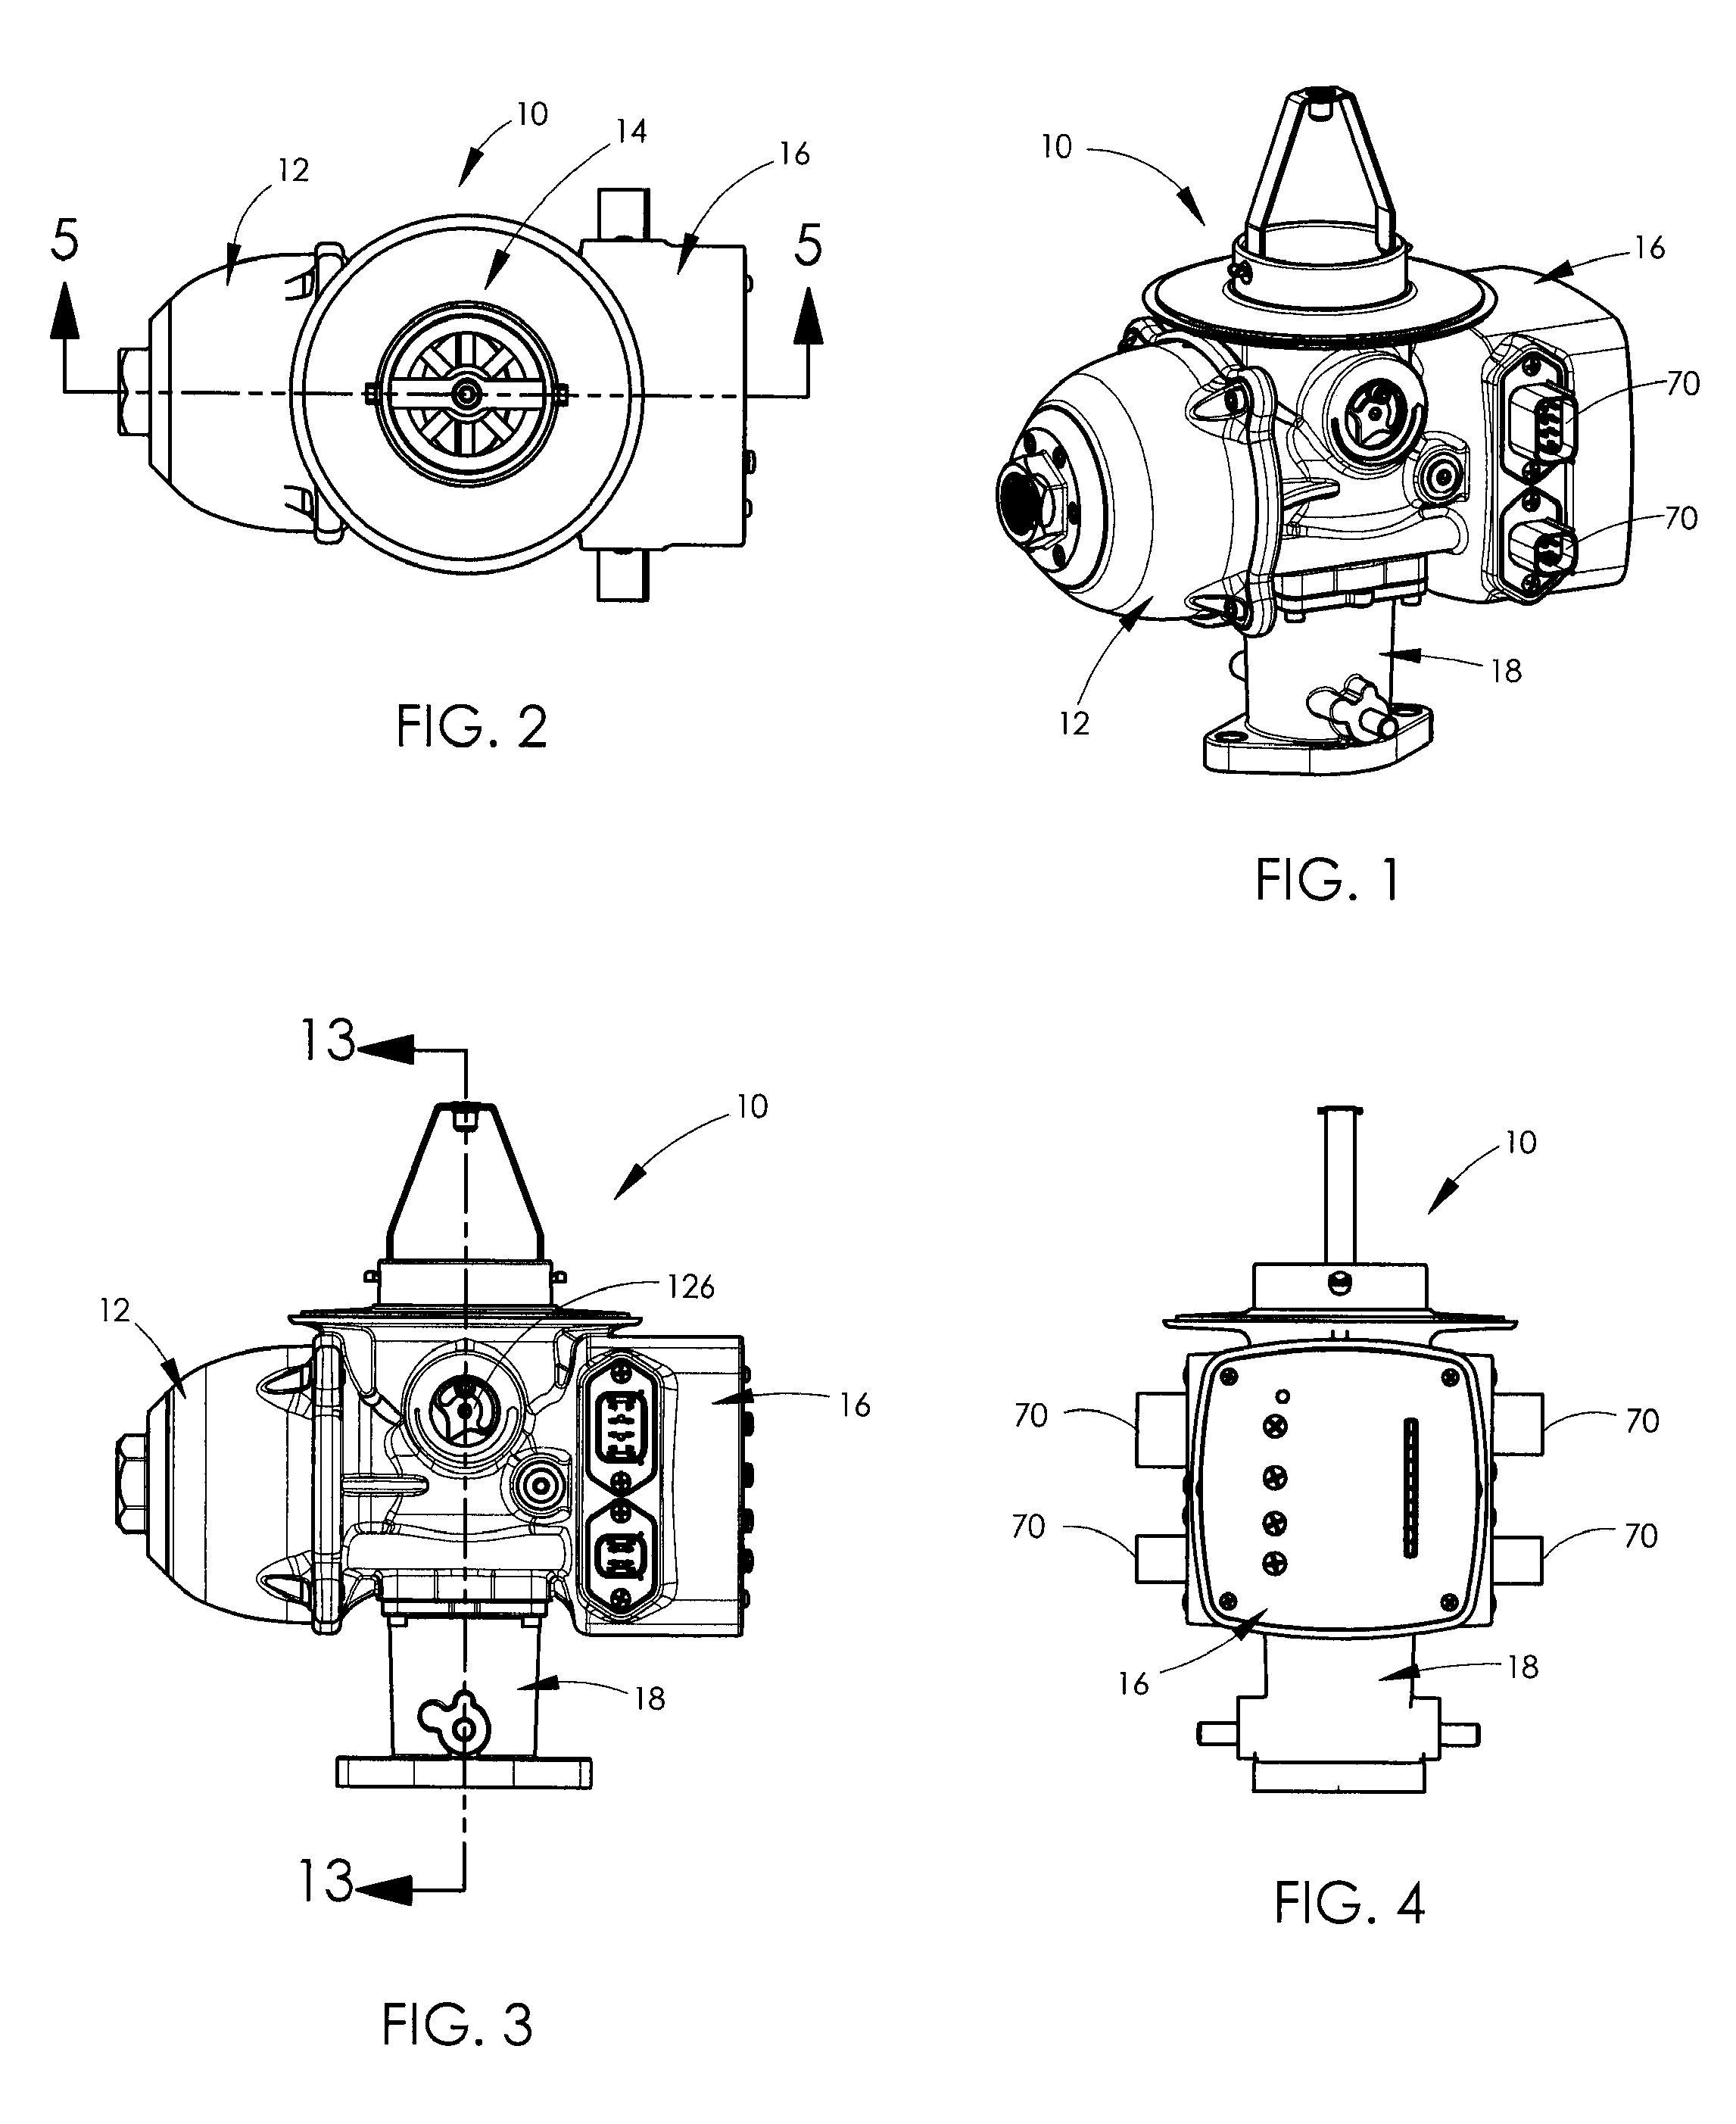 Fuel control system and method for gas engines